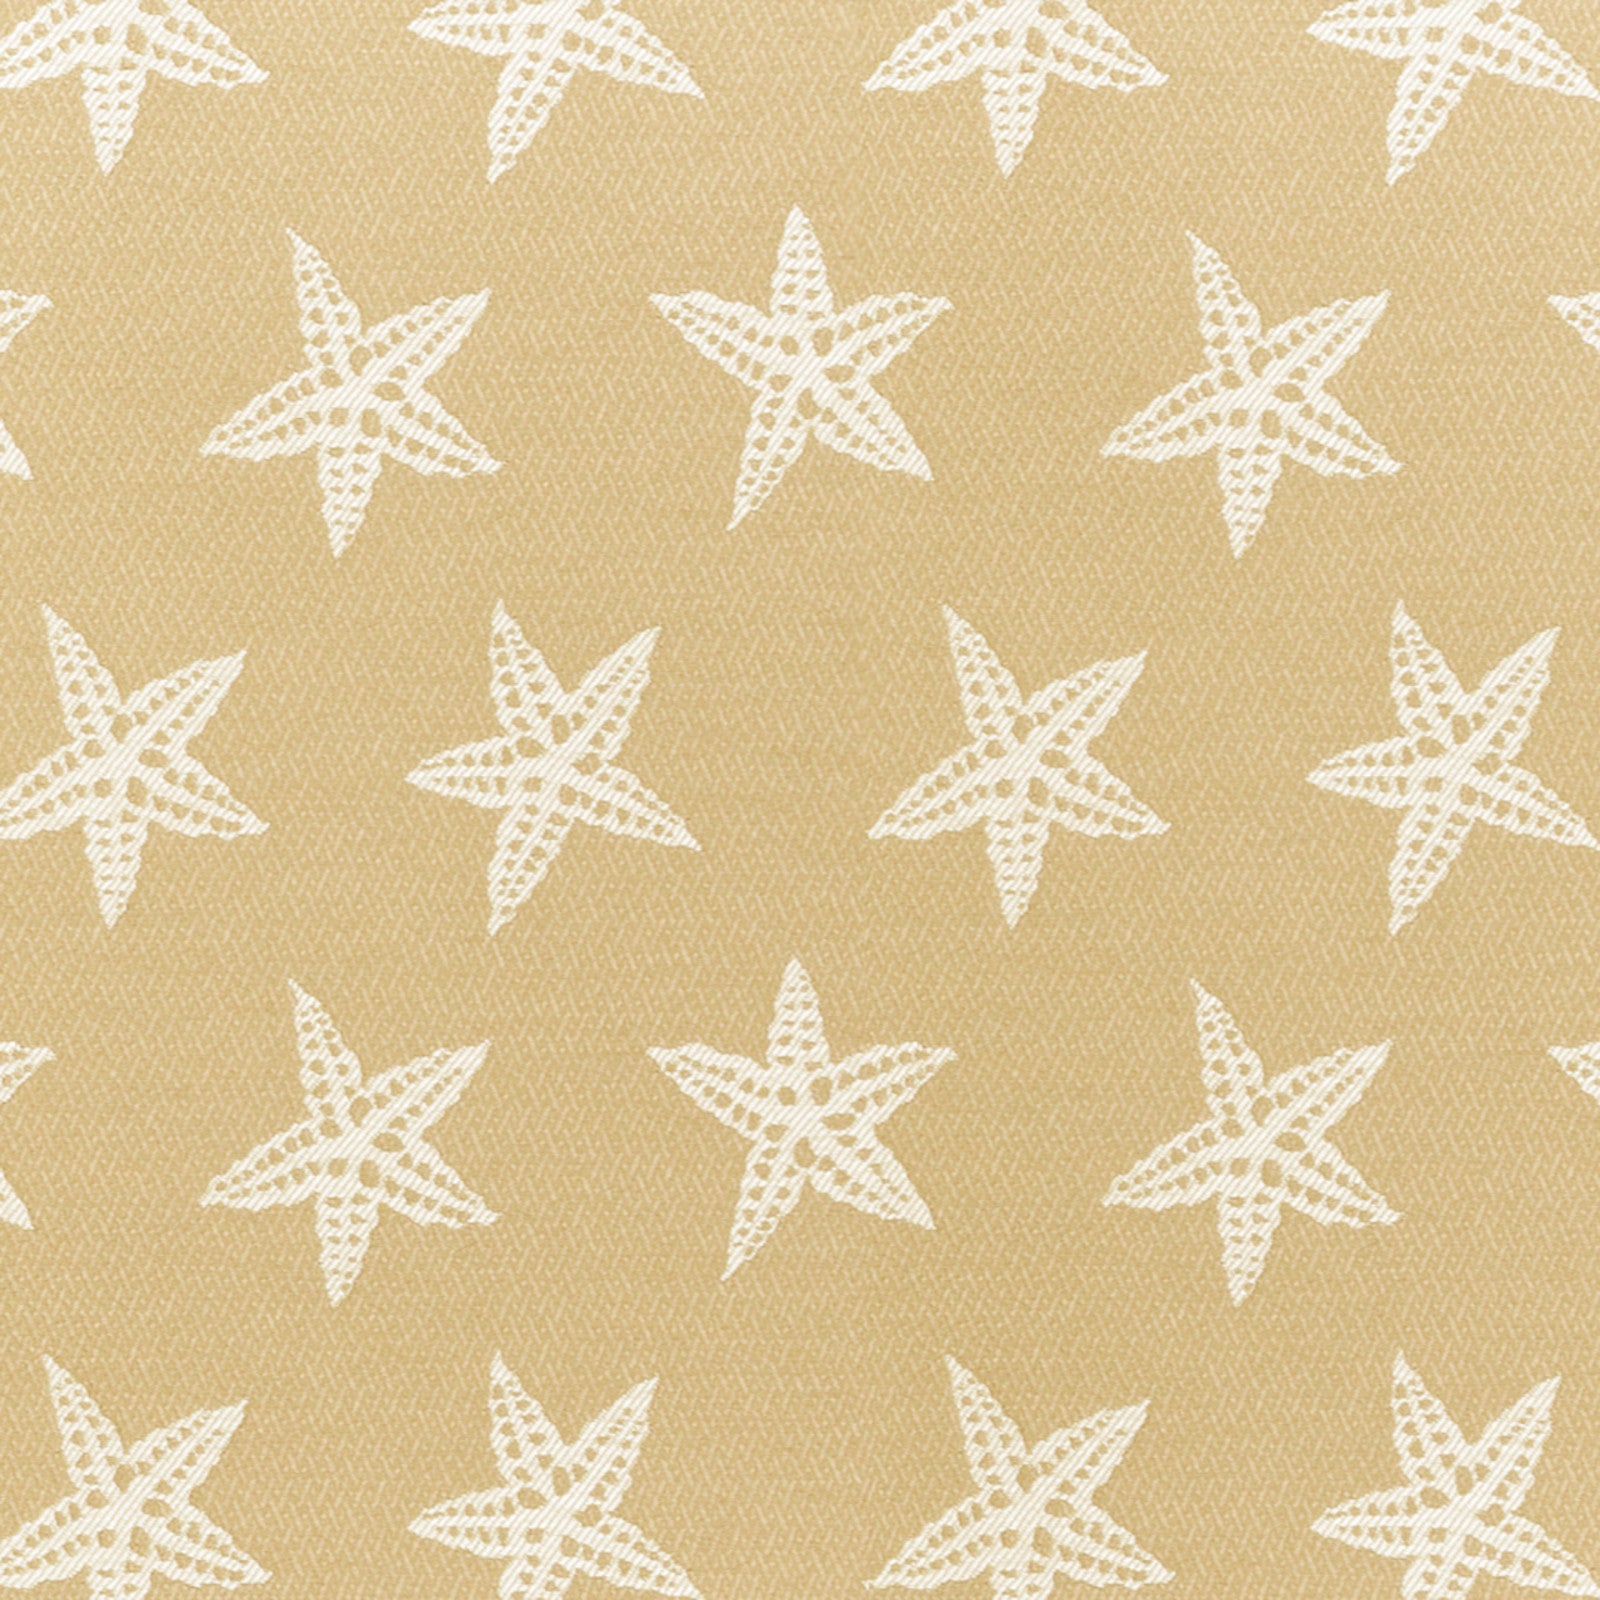 Purchase Greenhouse Fabric A8063 Sand